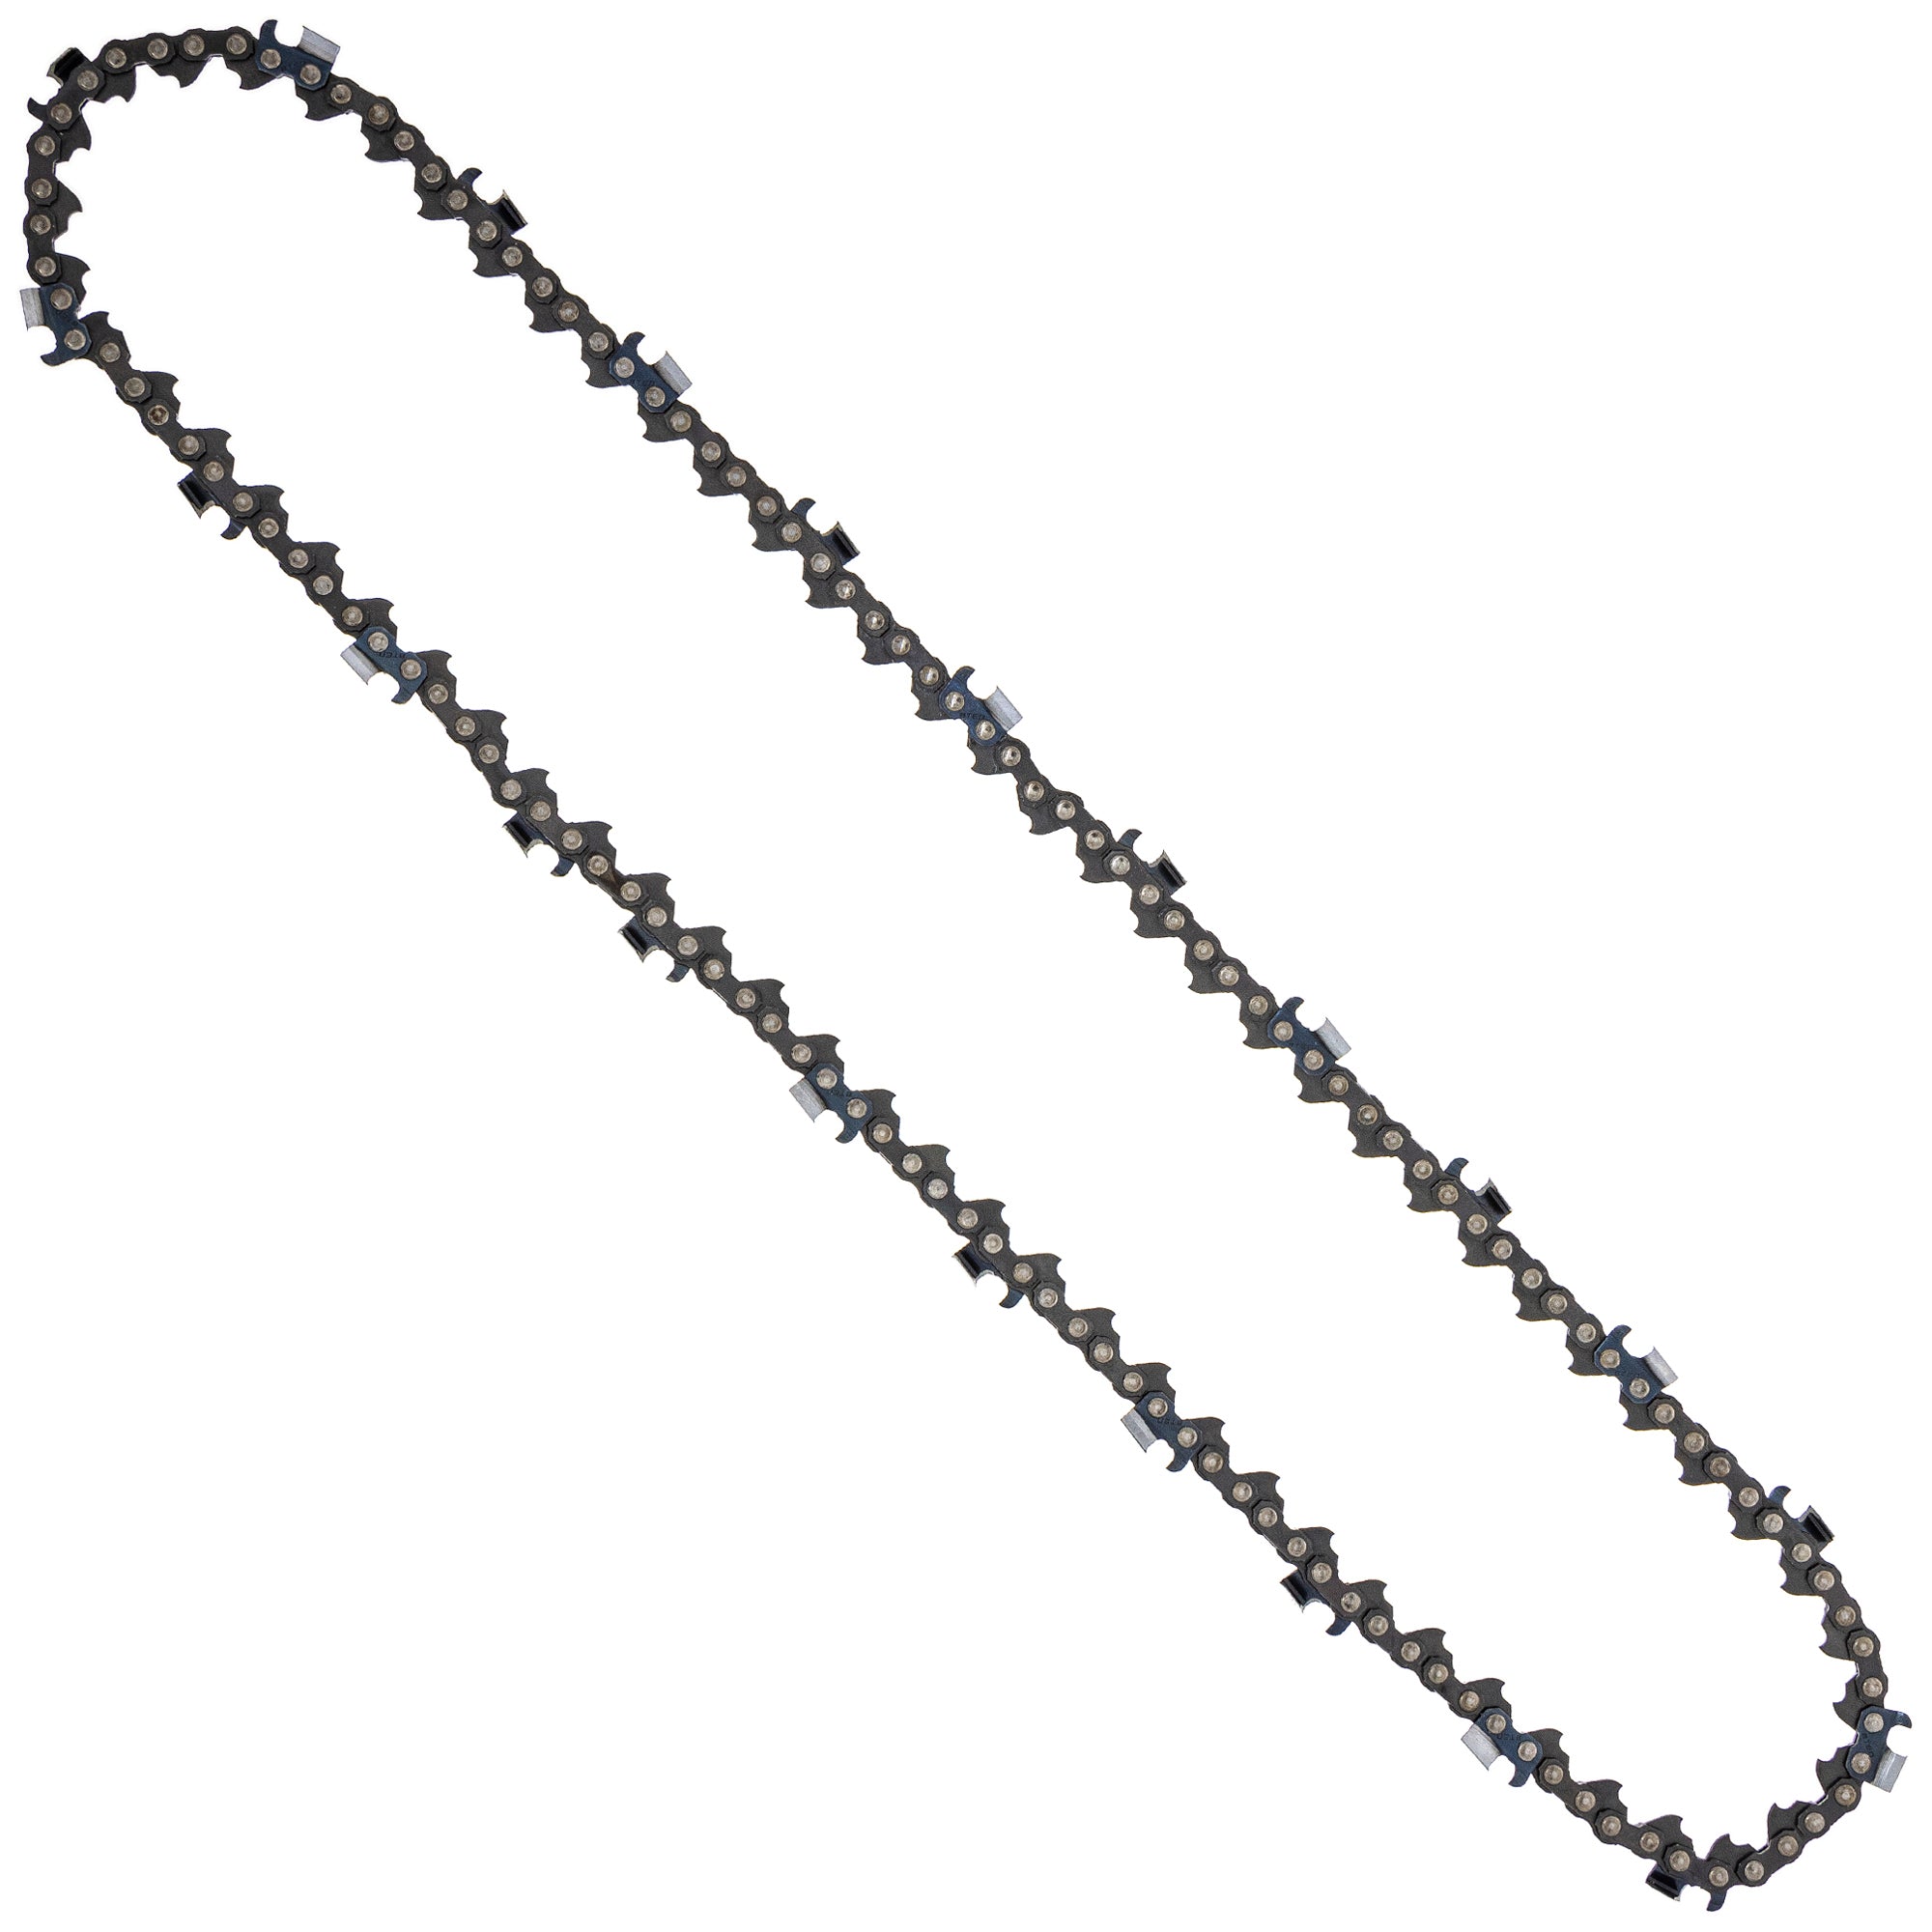 8TEN 810-CCC2392H Chain 10-Pack for zOTHER Oregon Husqvarna Poulan